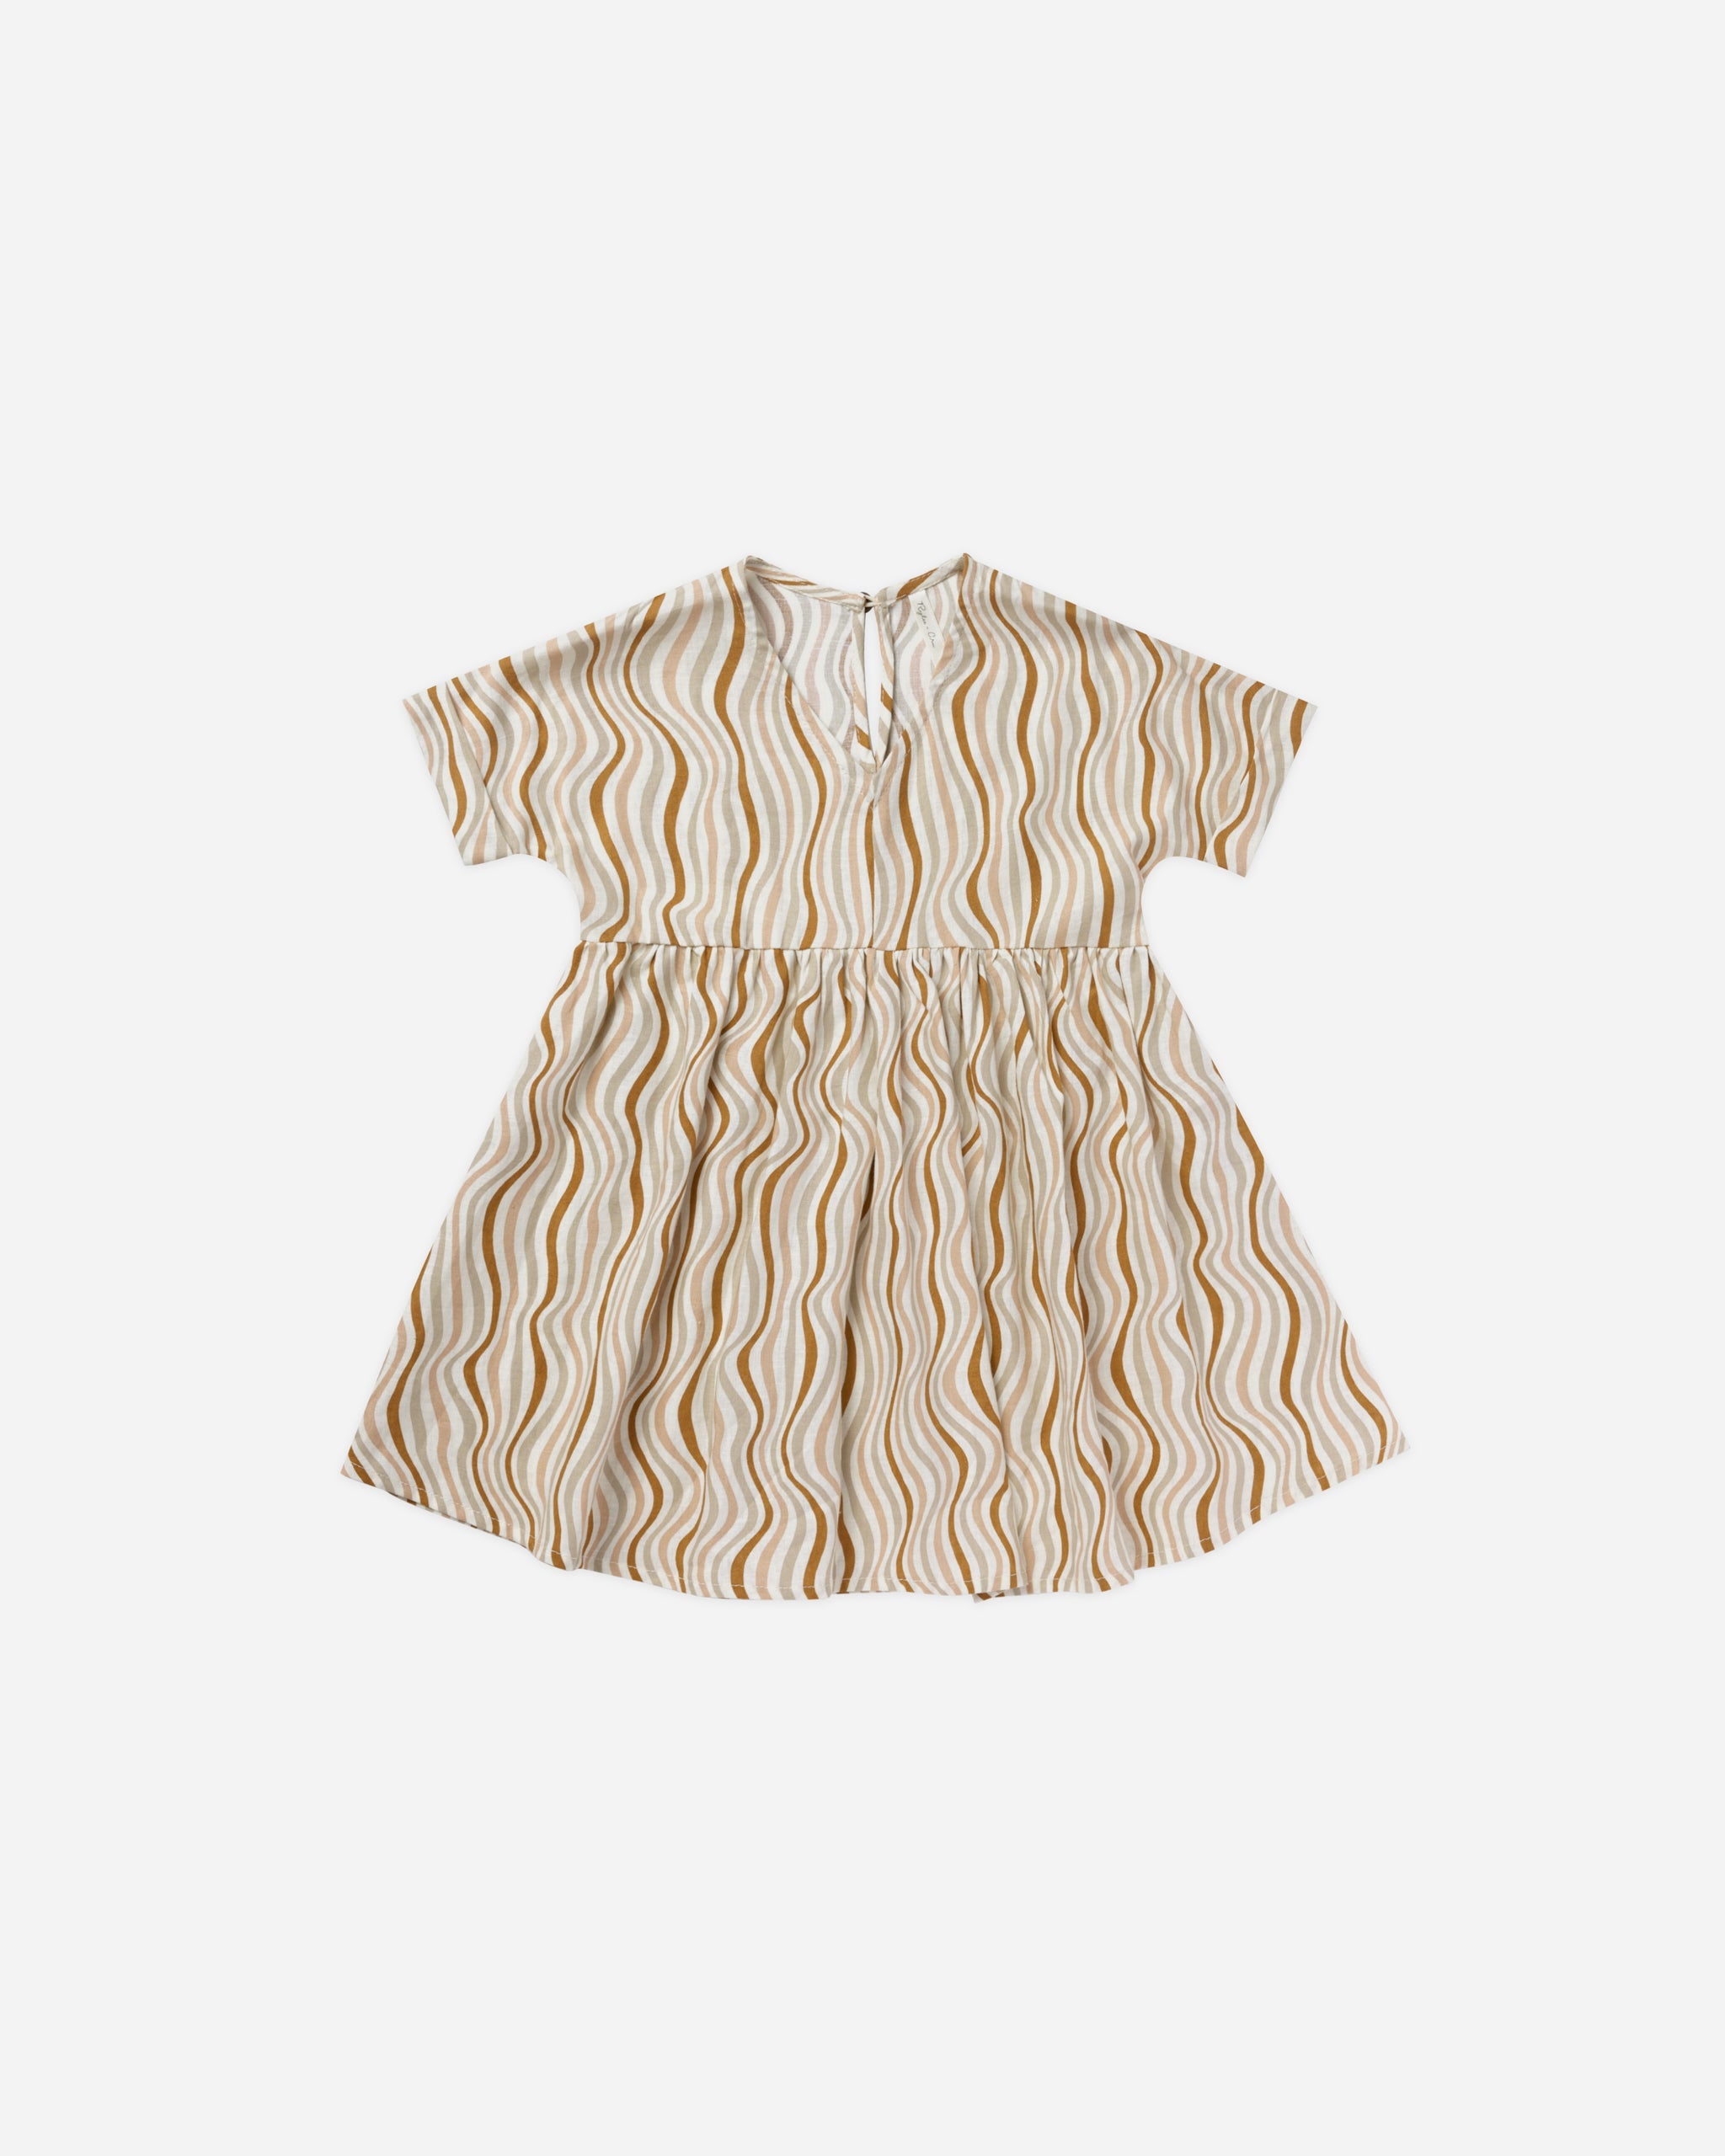 Maxwell Dress || Retro Waves - Rylee + Cru | Kids Clothes | Trendy Baby Clothes | Modern Infant Outfits |